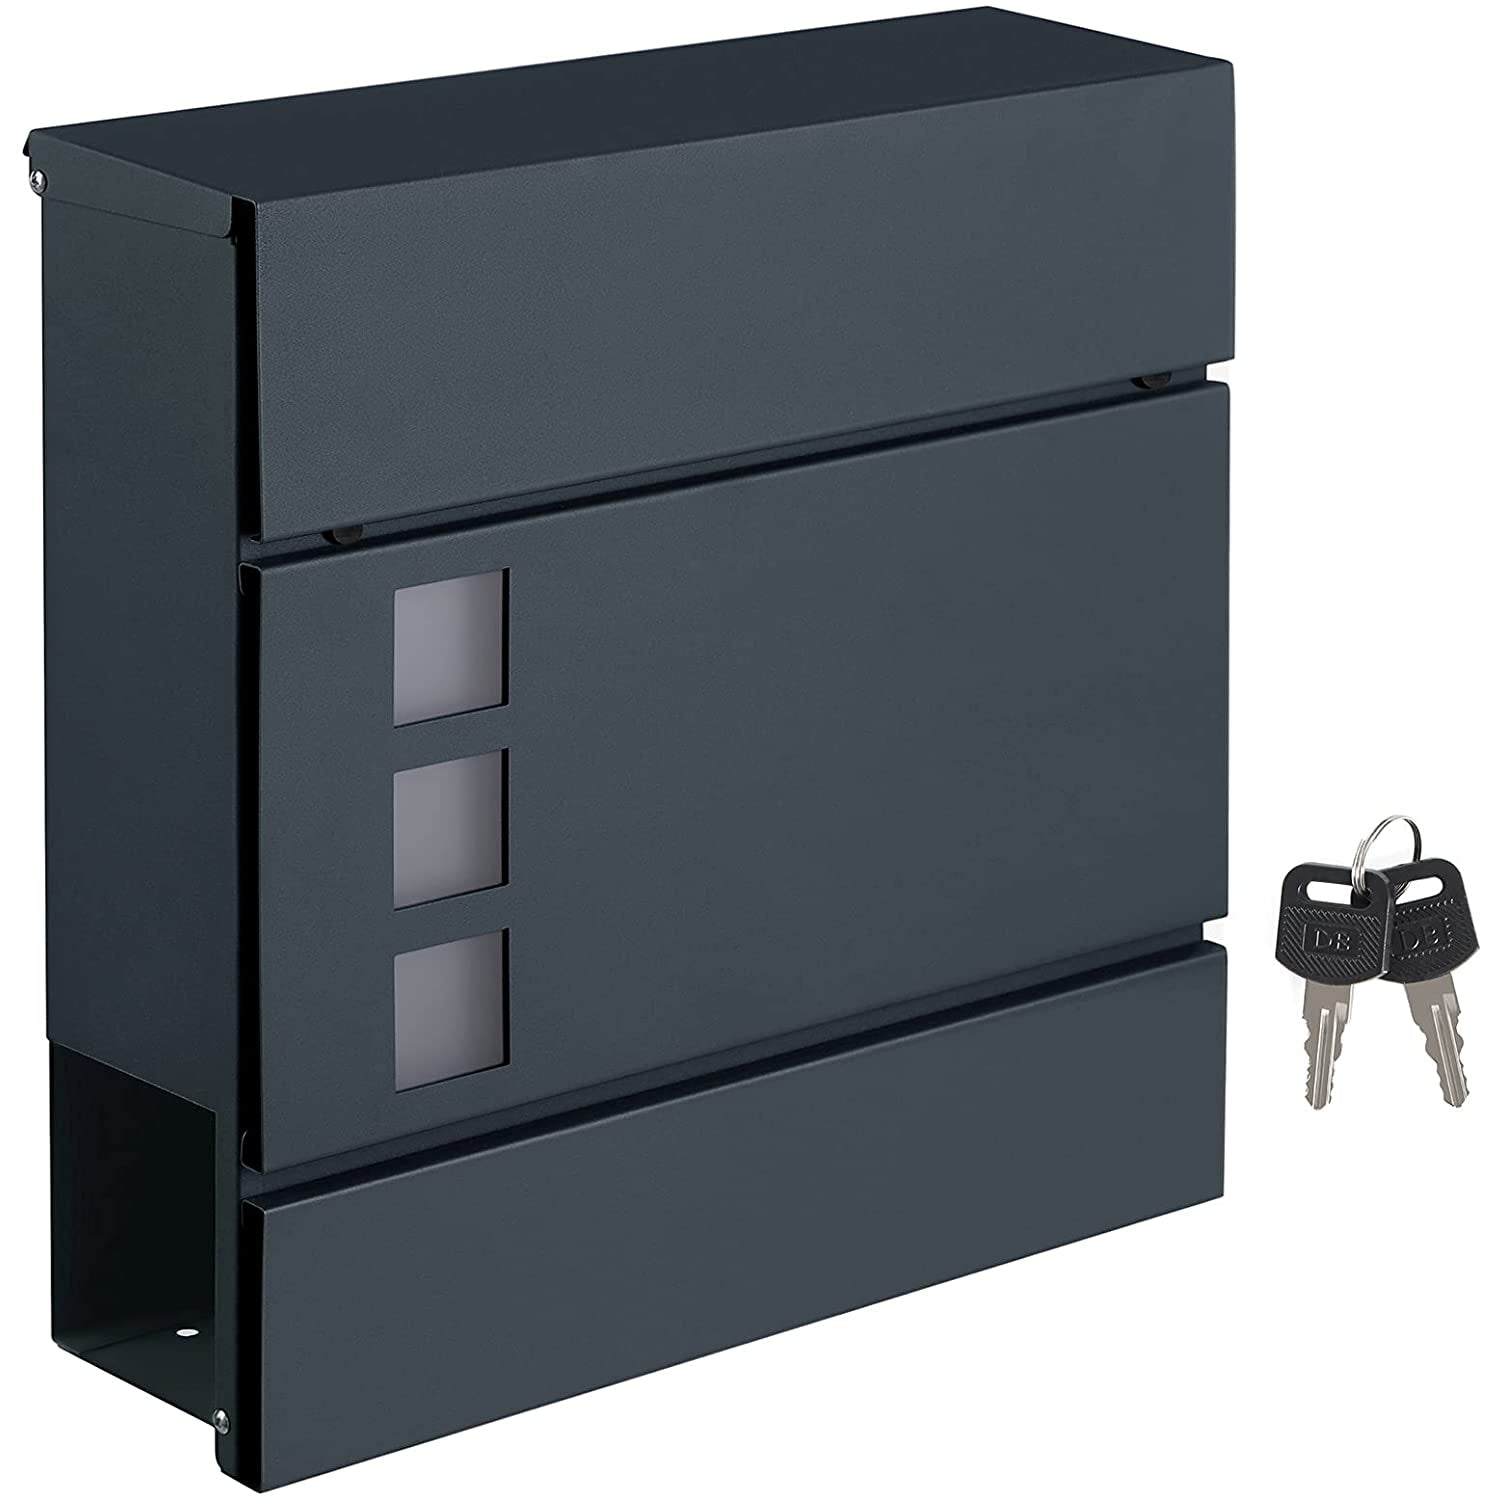 Nancy's Fordwich Letterbox - Wall letterbox - Wall mounting - Lockable - Newspaper compartment - Anthracite - Metal